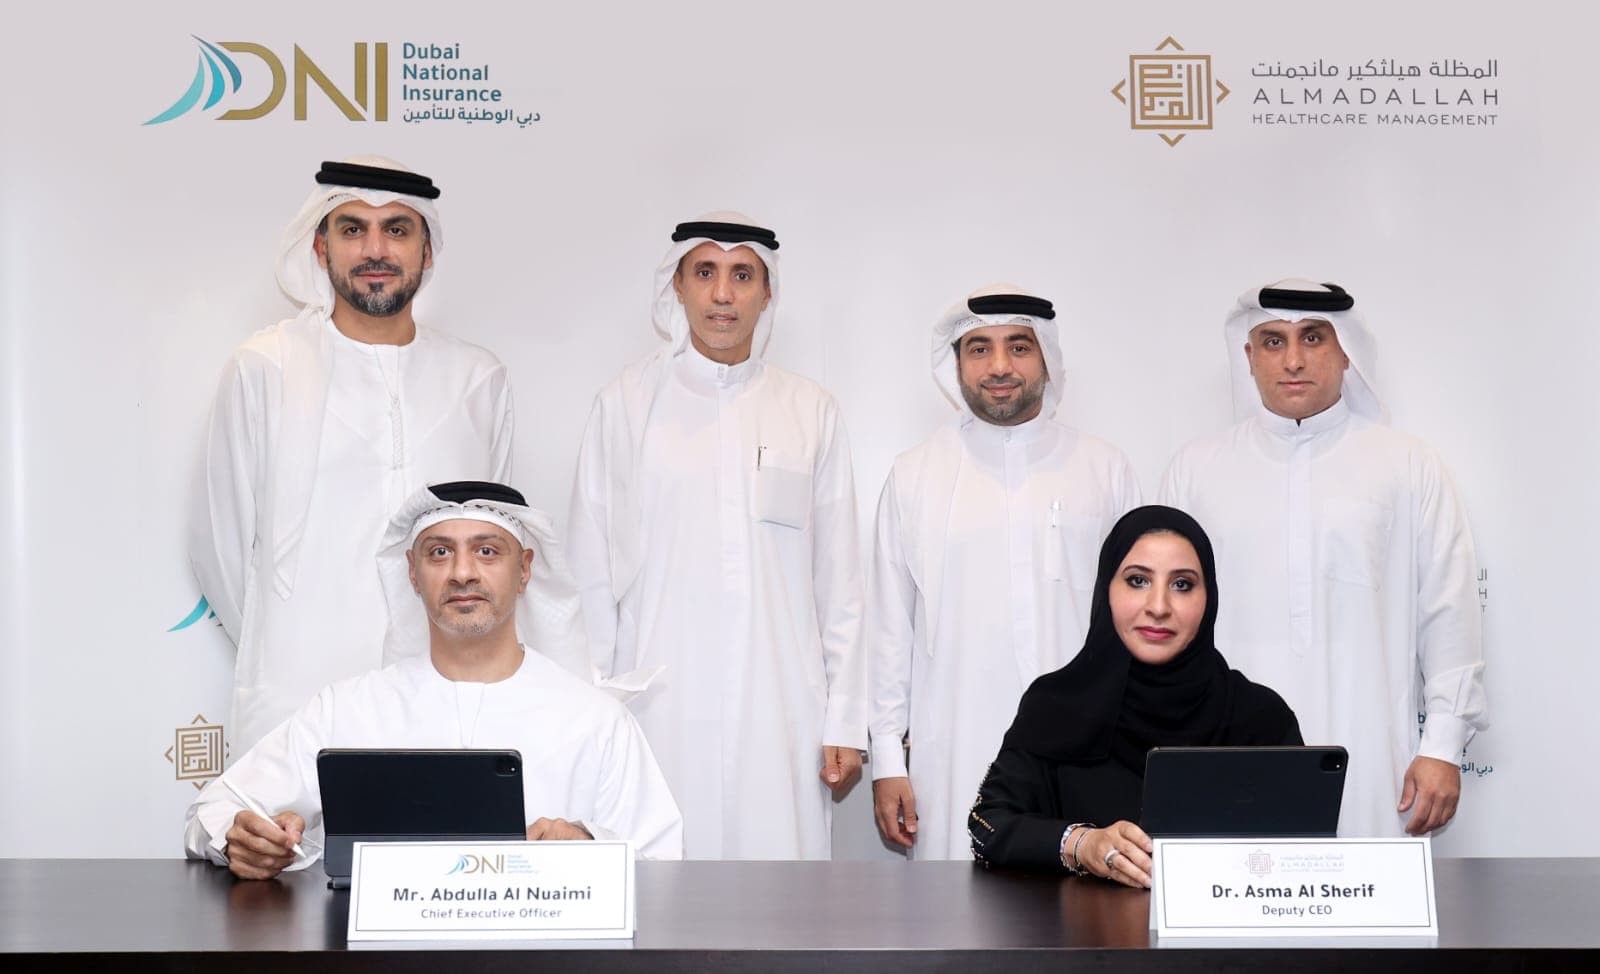 DNI signs a collaboration agreement with Almadallah